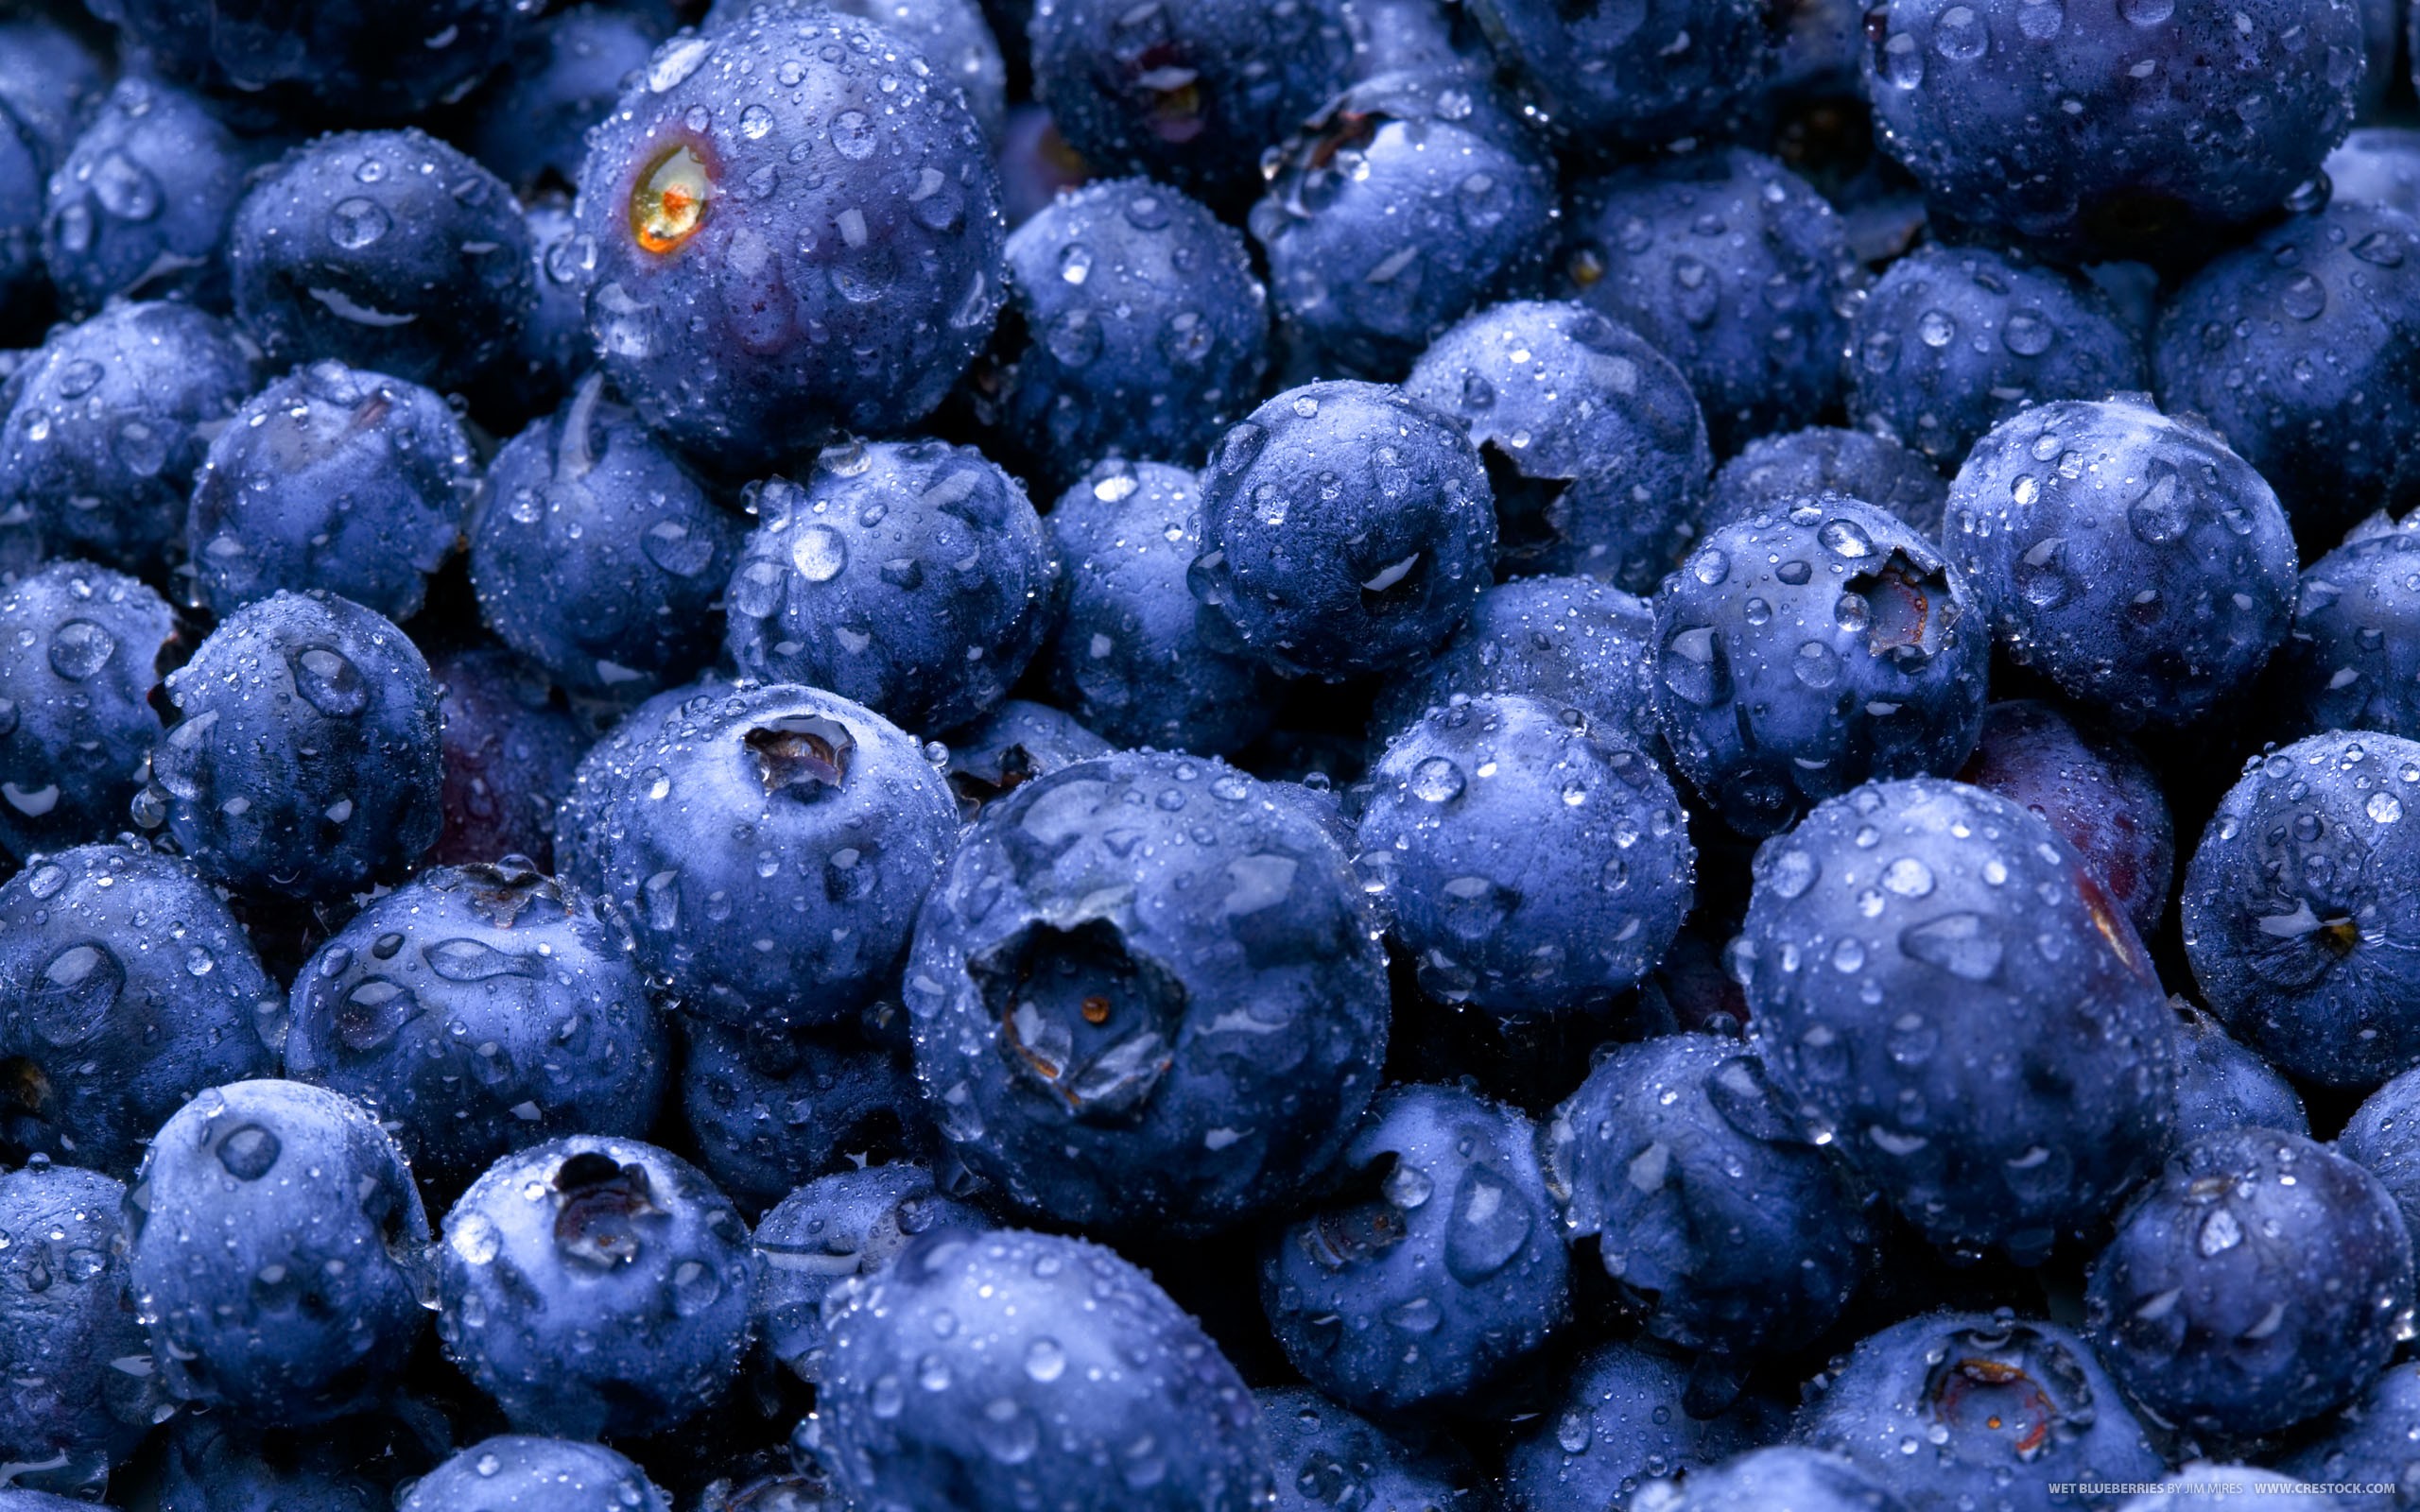 Blueberry Photos Download The BEST Free Blueberry Stock Photos  HD Images